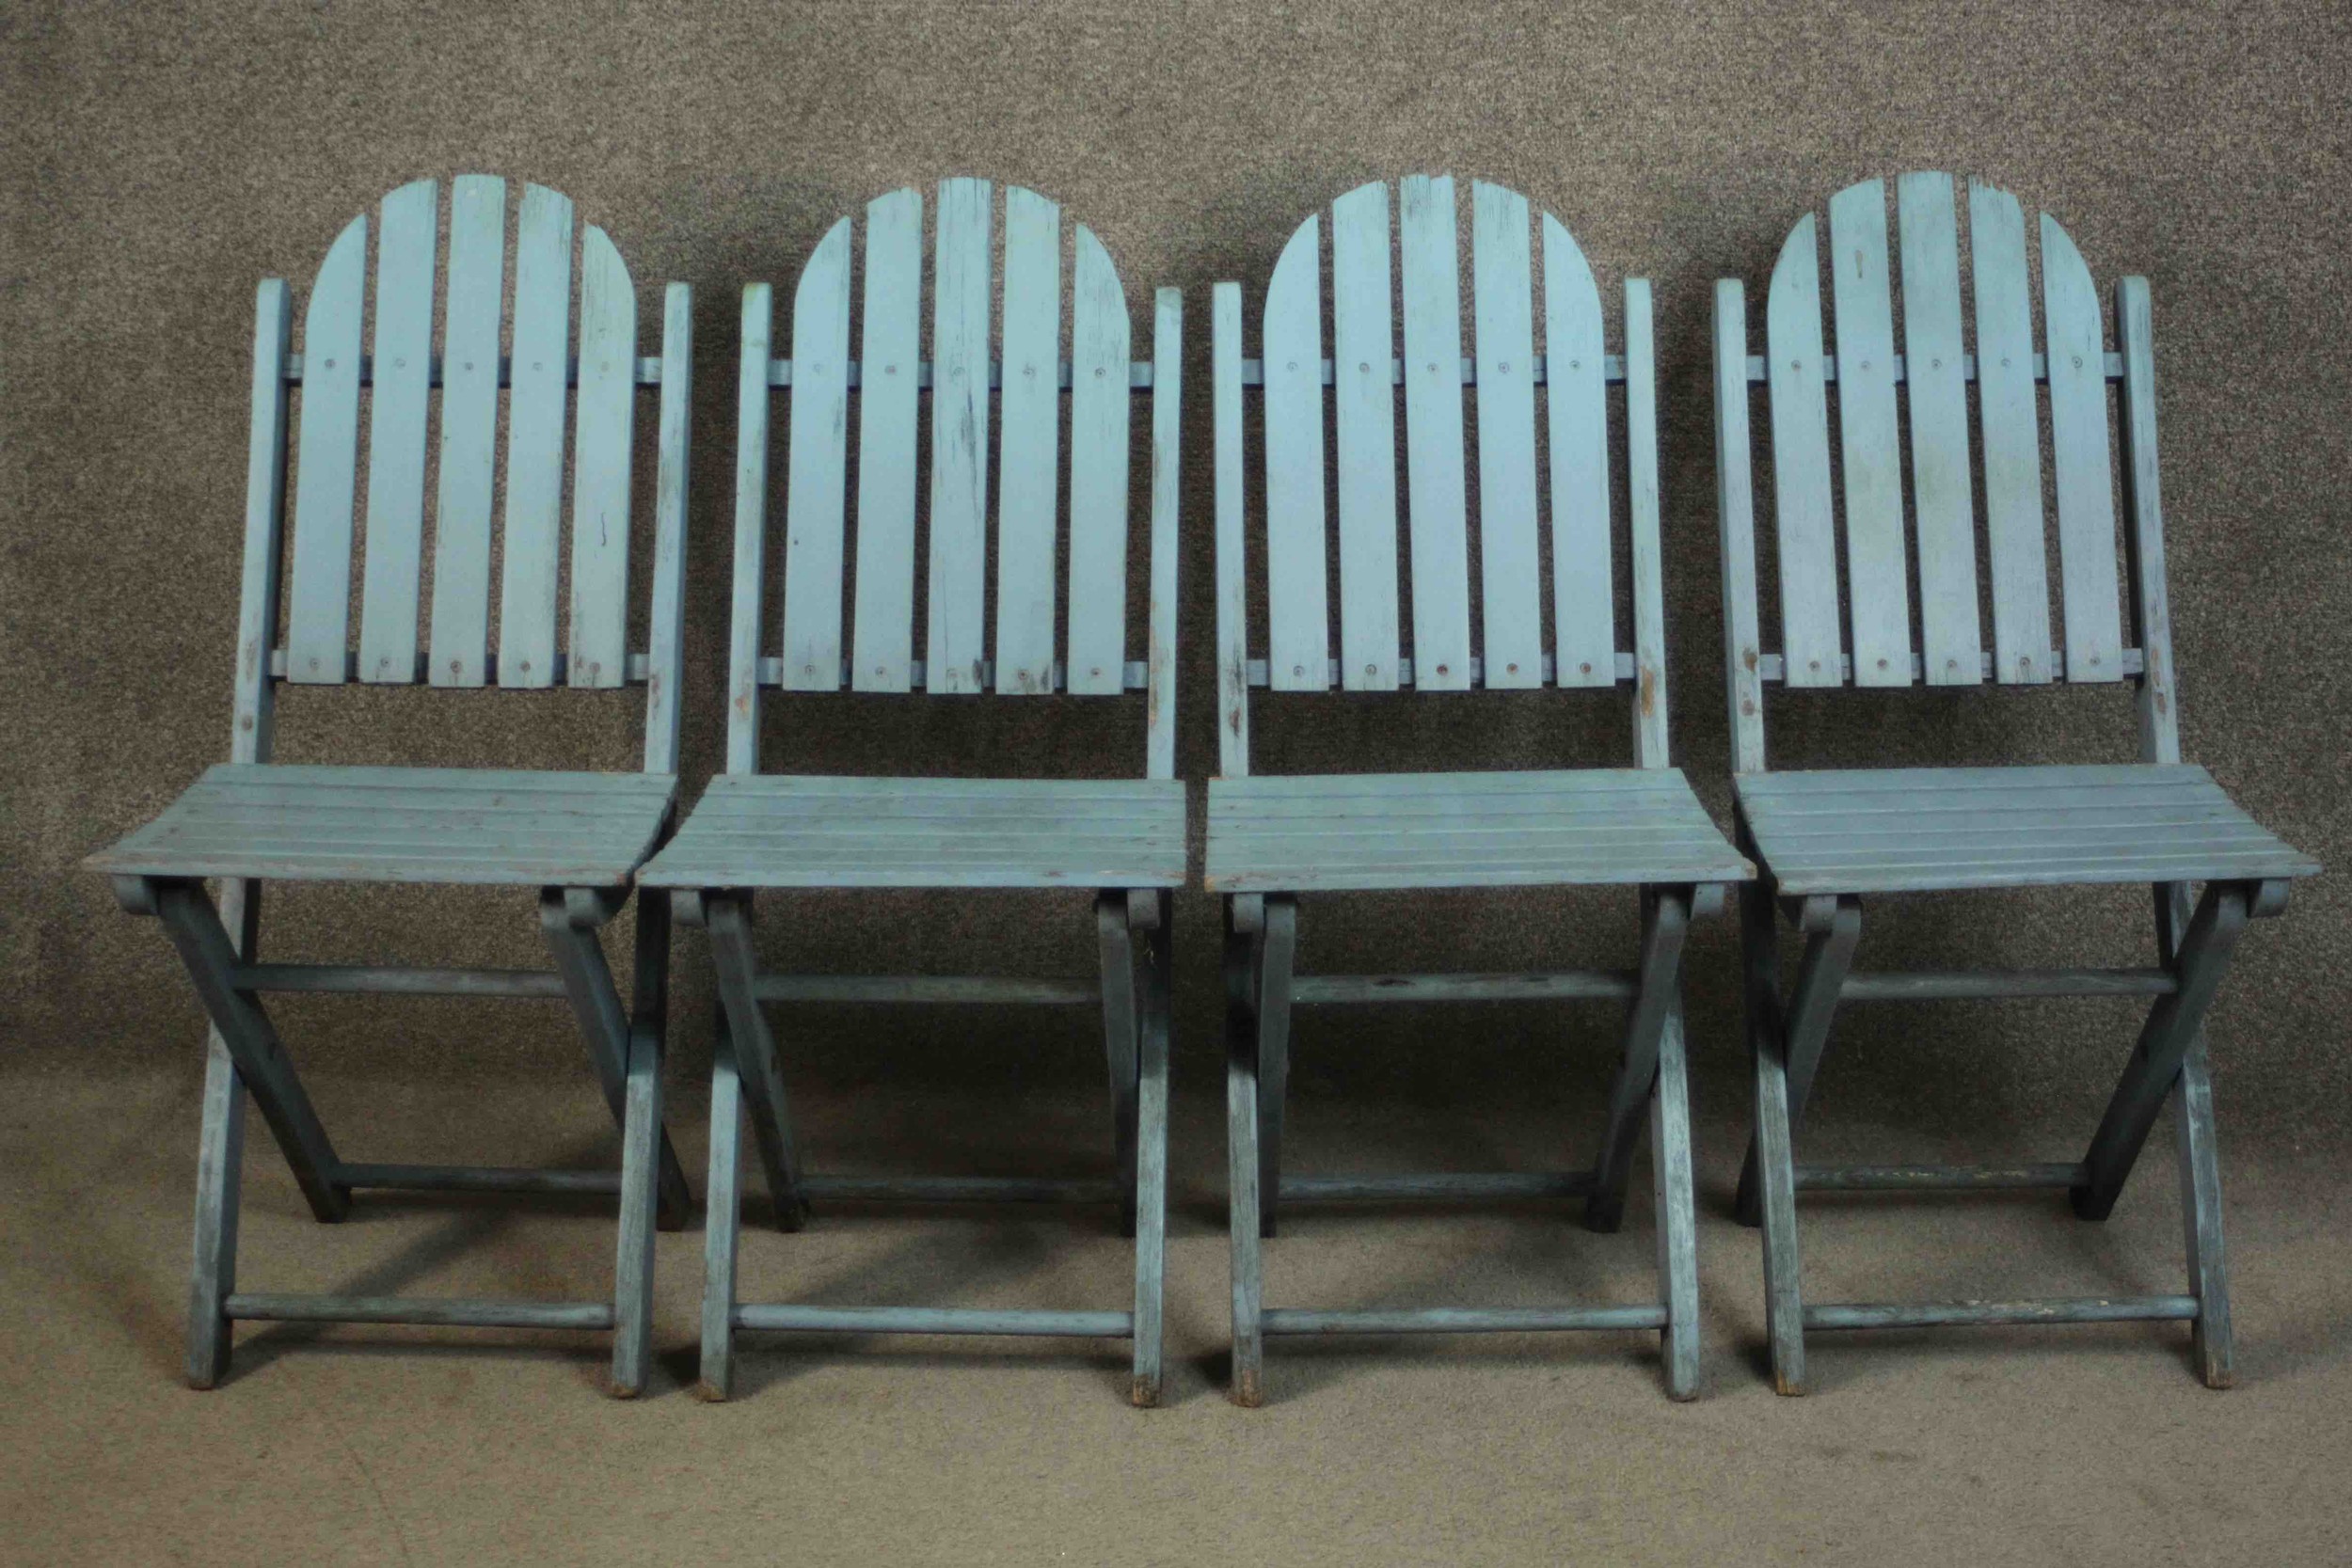 A set of four blue painted folding garden chairs with slatted backs and seats.